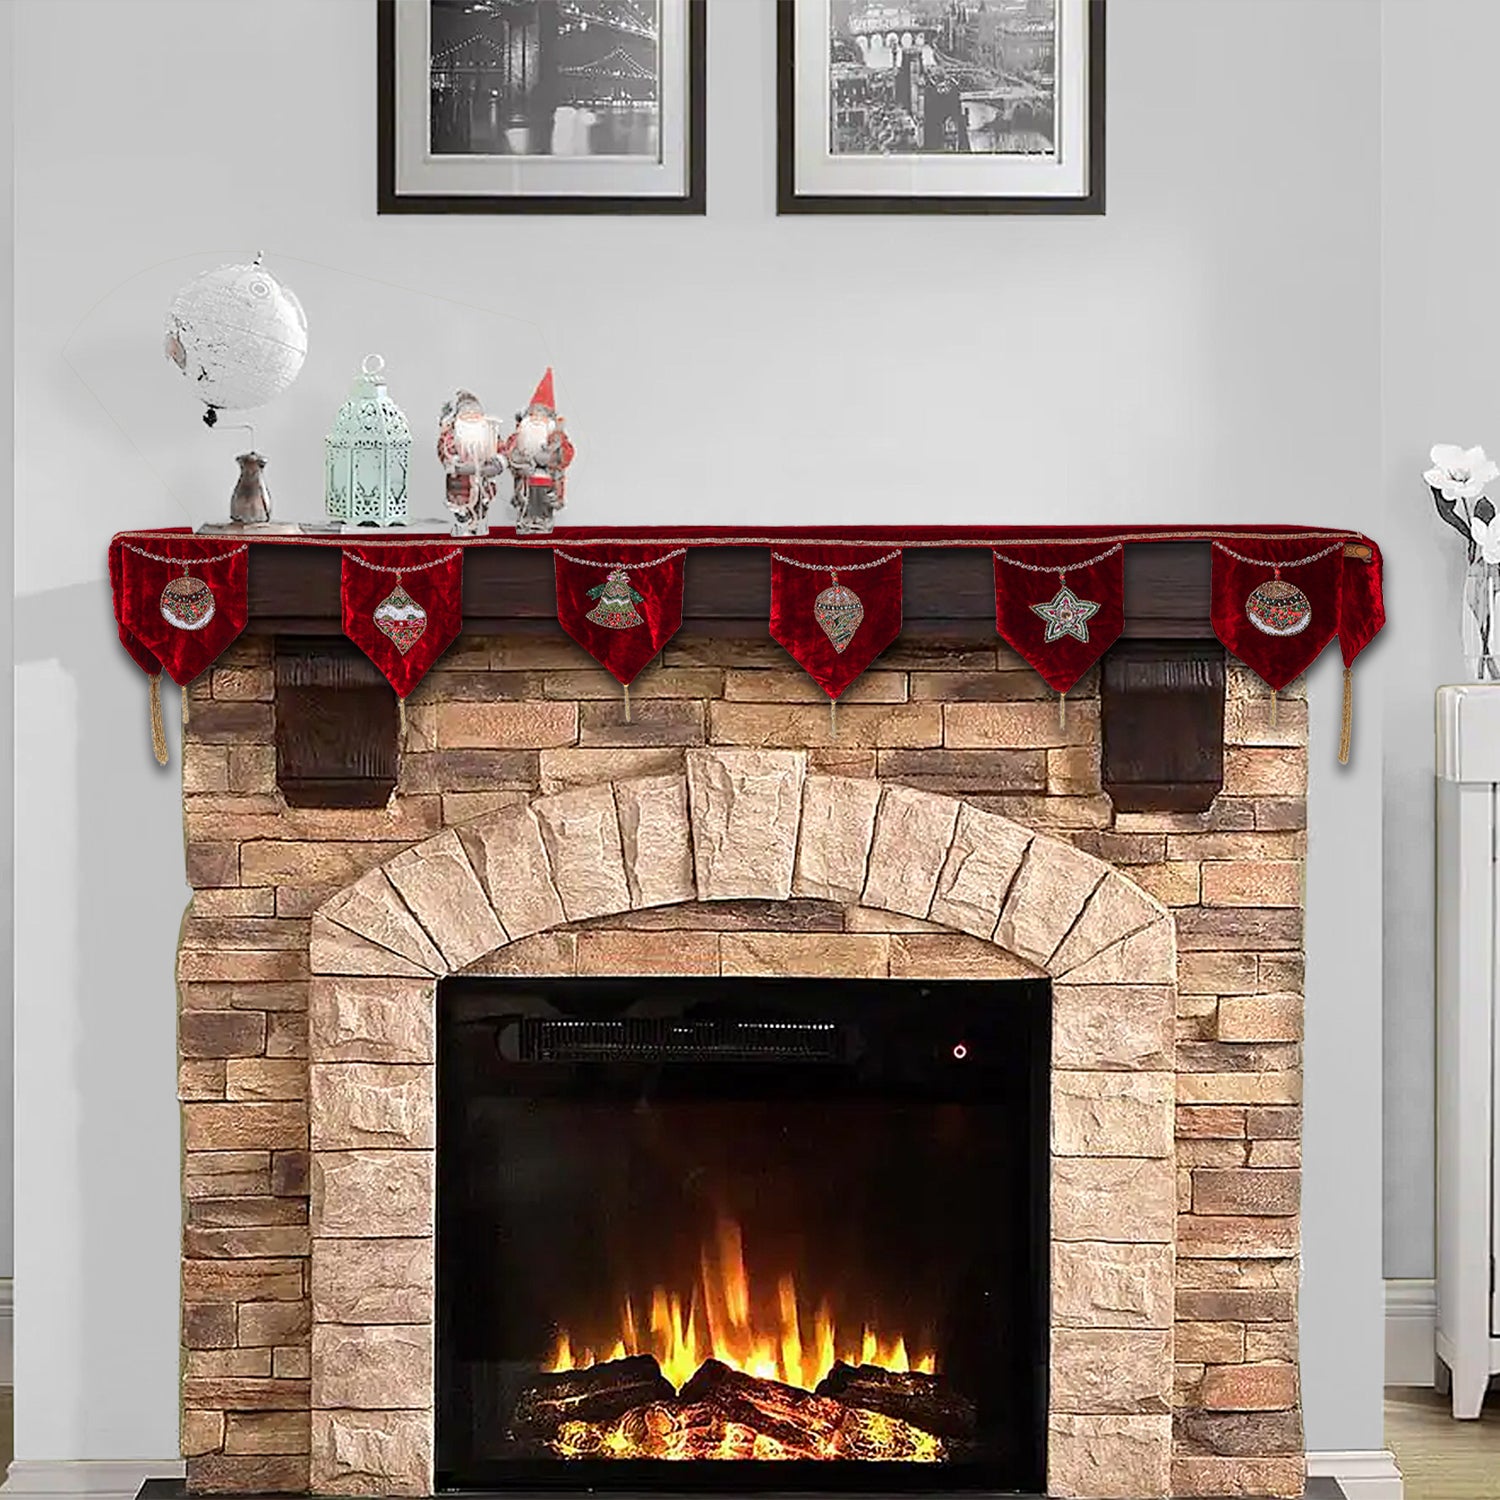 Ornament Red Velvet Christmas Mantle Scarf Available in 2 sizes 60" & 72". Fireplace Christmas Scarf